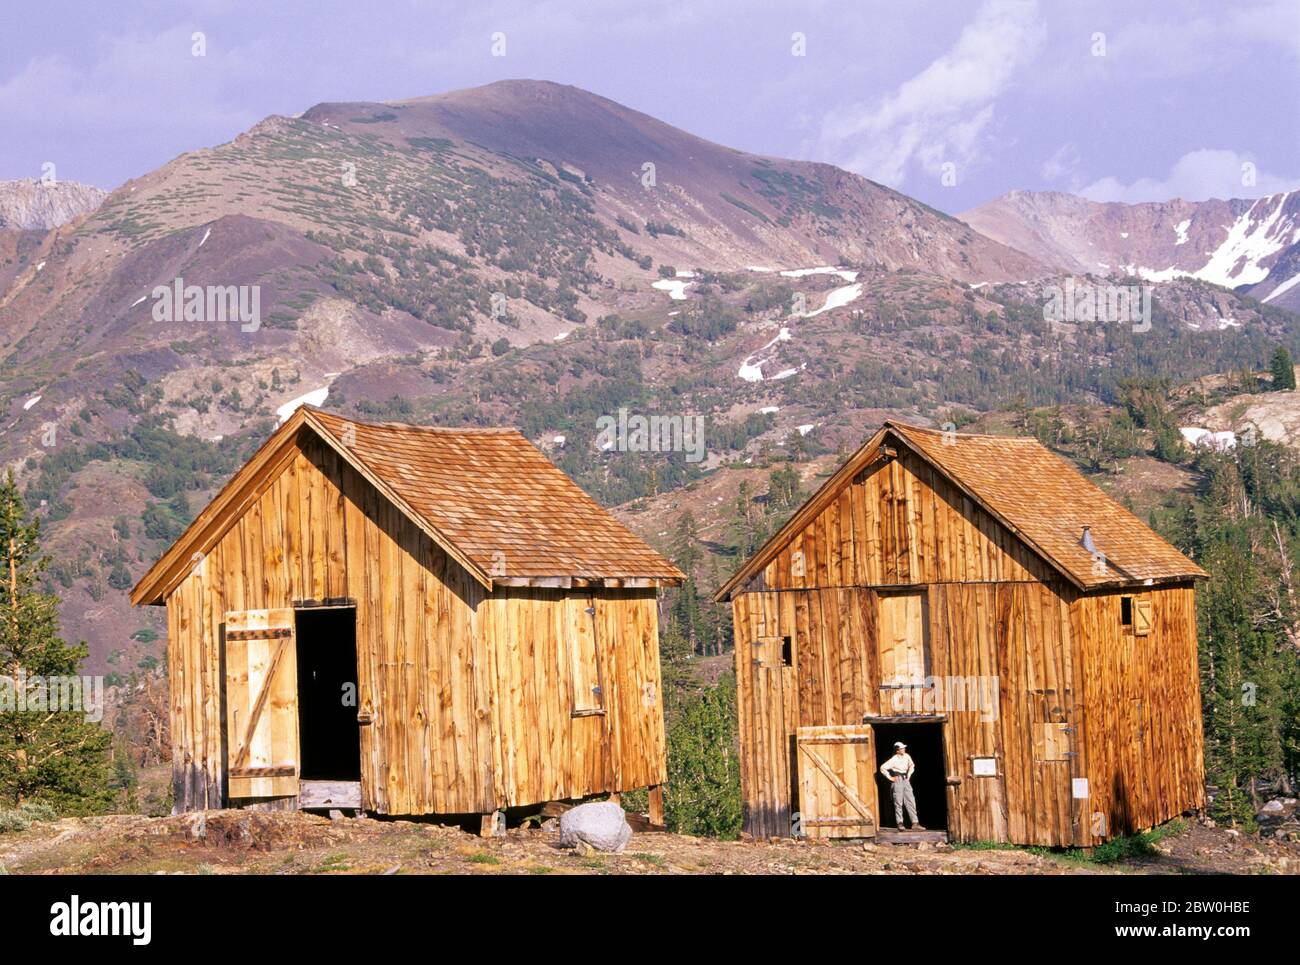 Bennettville, Inyo National Forest, California Stock Photo